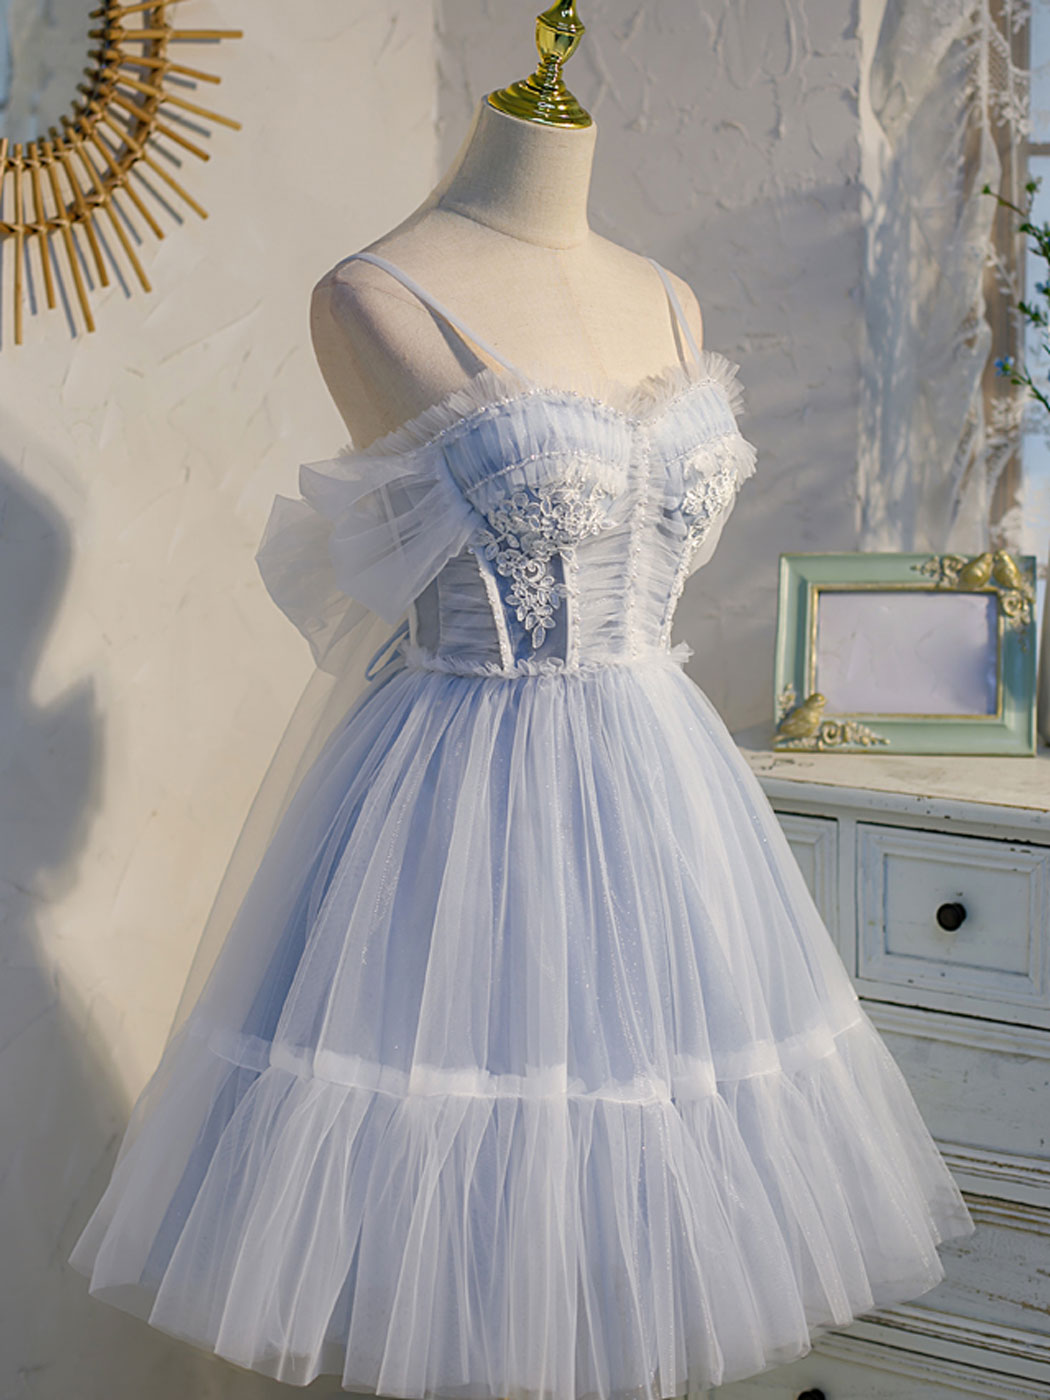 Unique Prom Dress, Blue sweetheart neck tulle lace short prom dress blue puffy homecoming dress